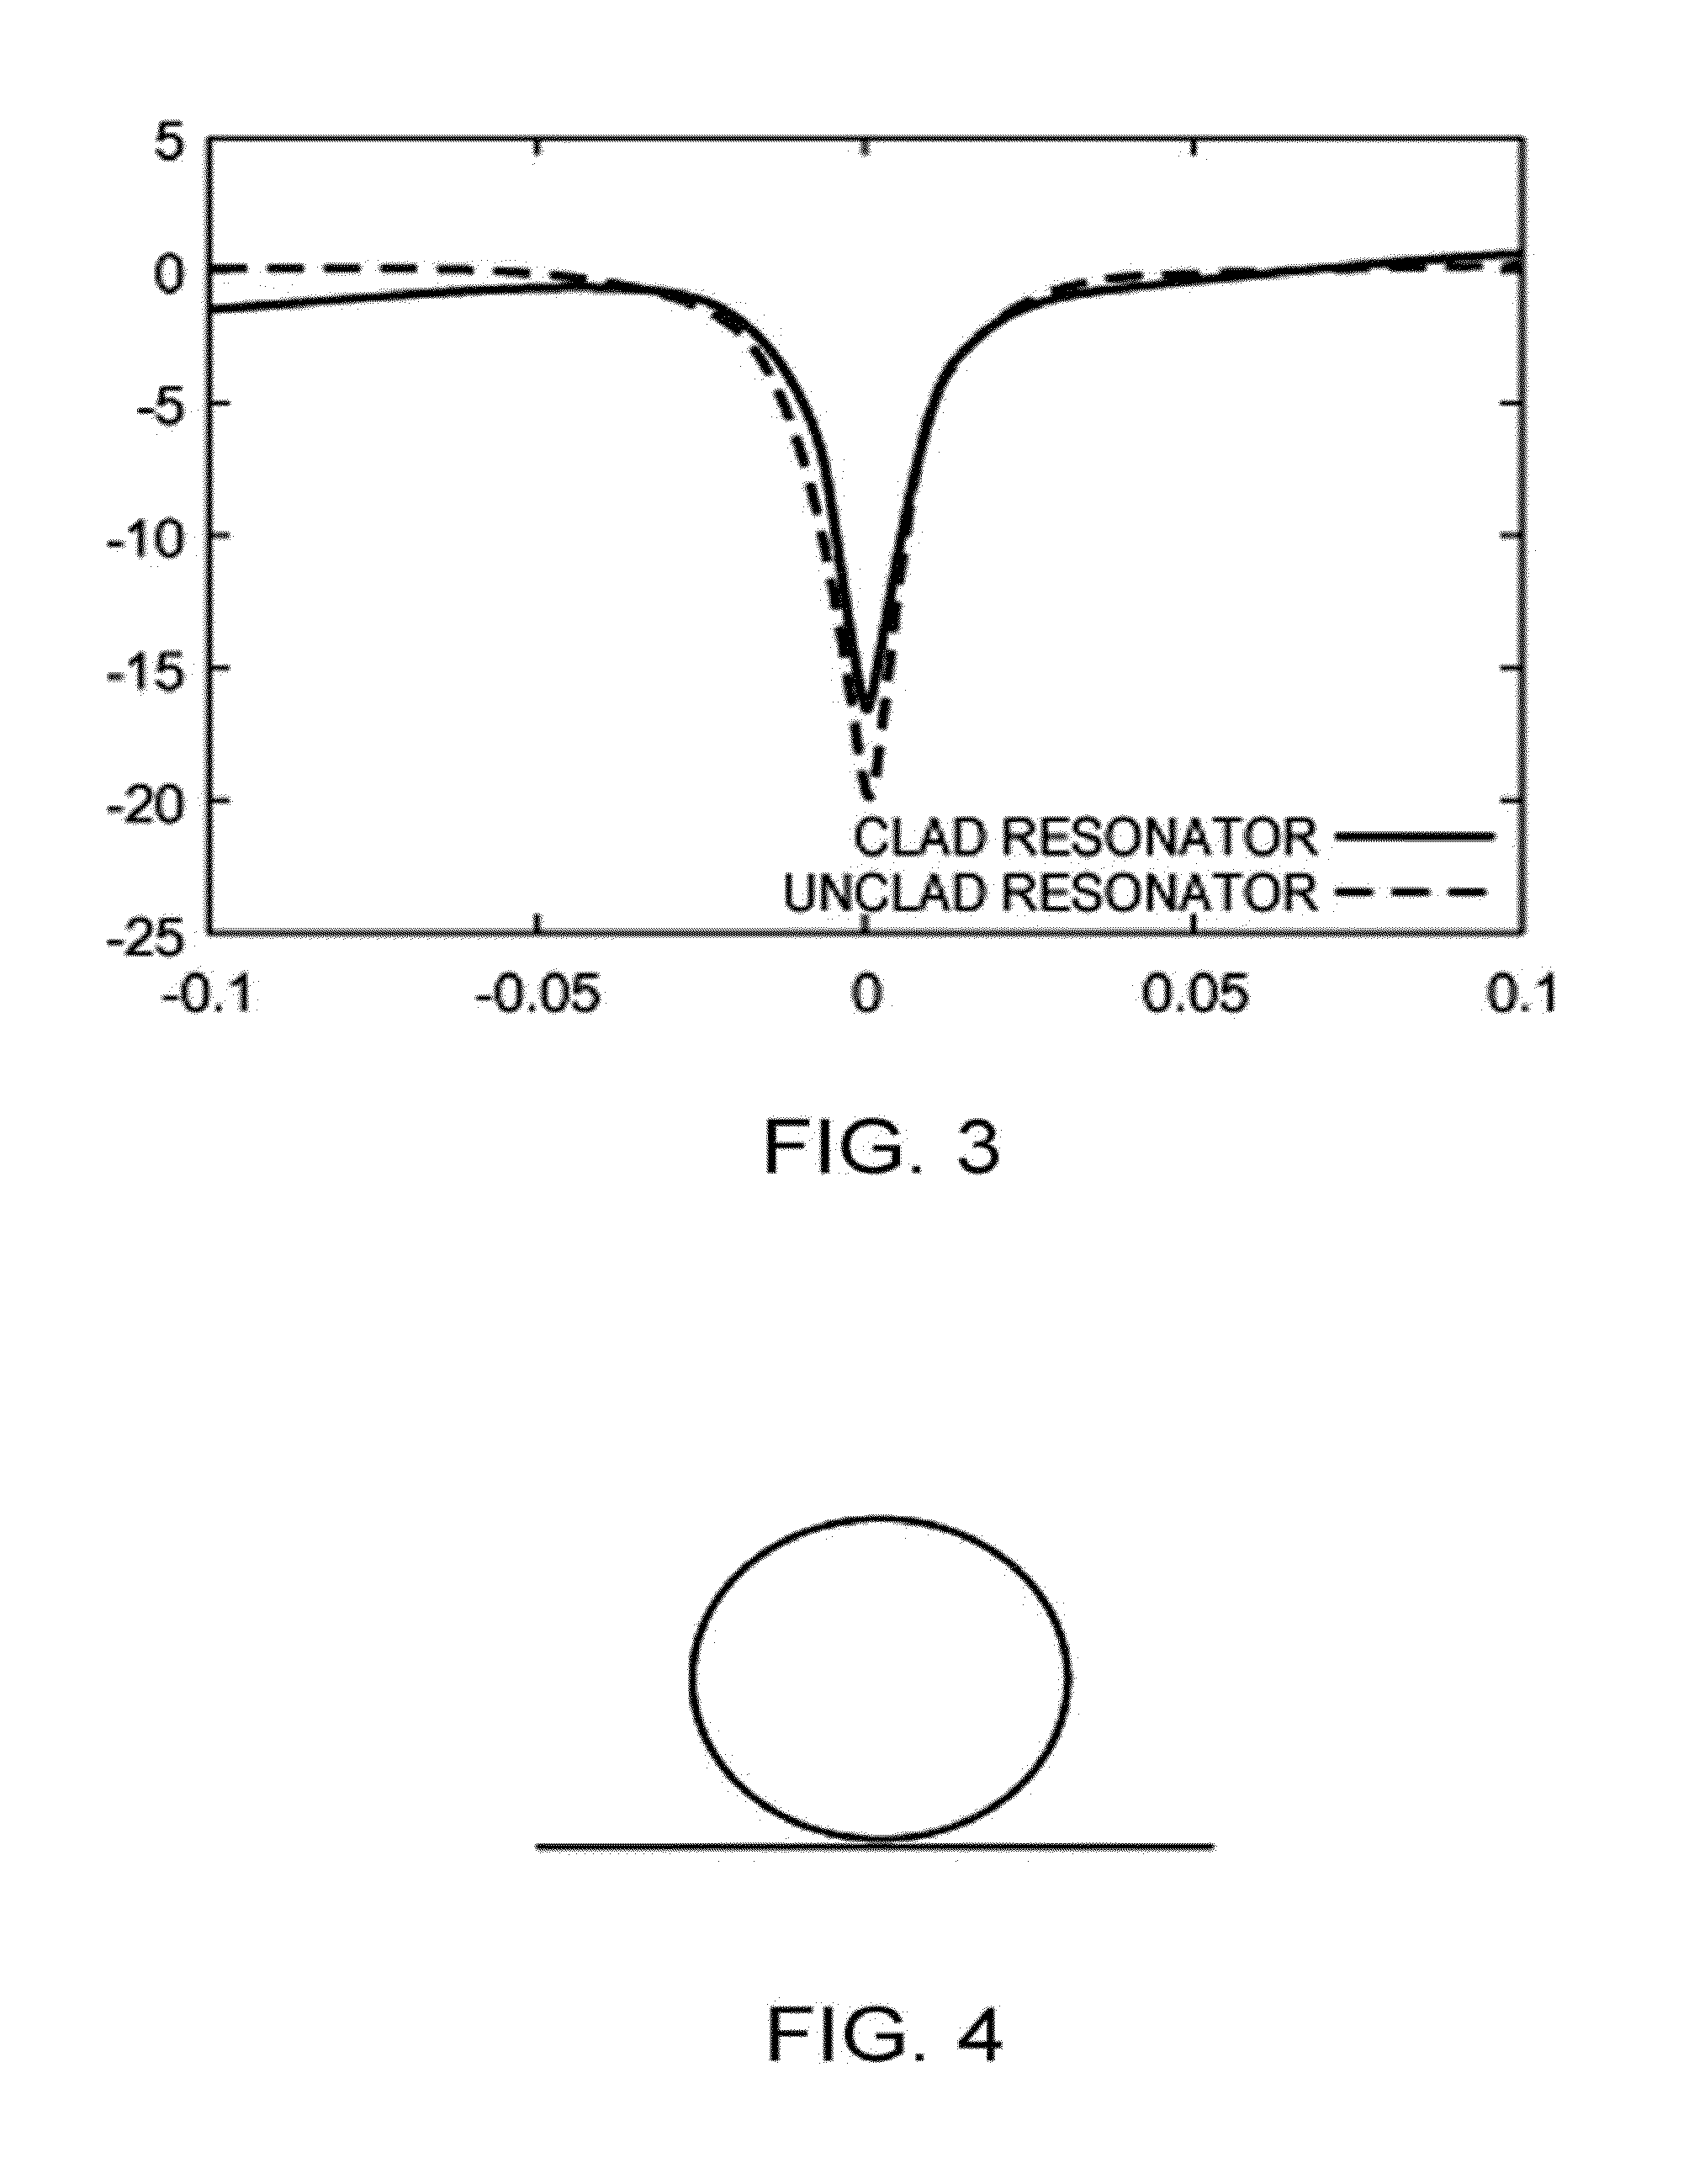 All-optical high bandwidth sampling device based on a third-order optical nonlinearity